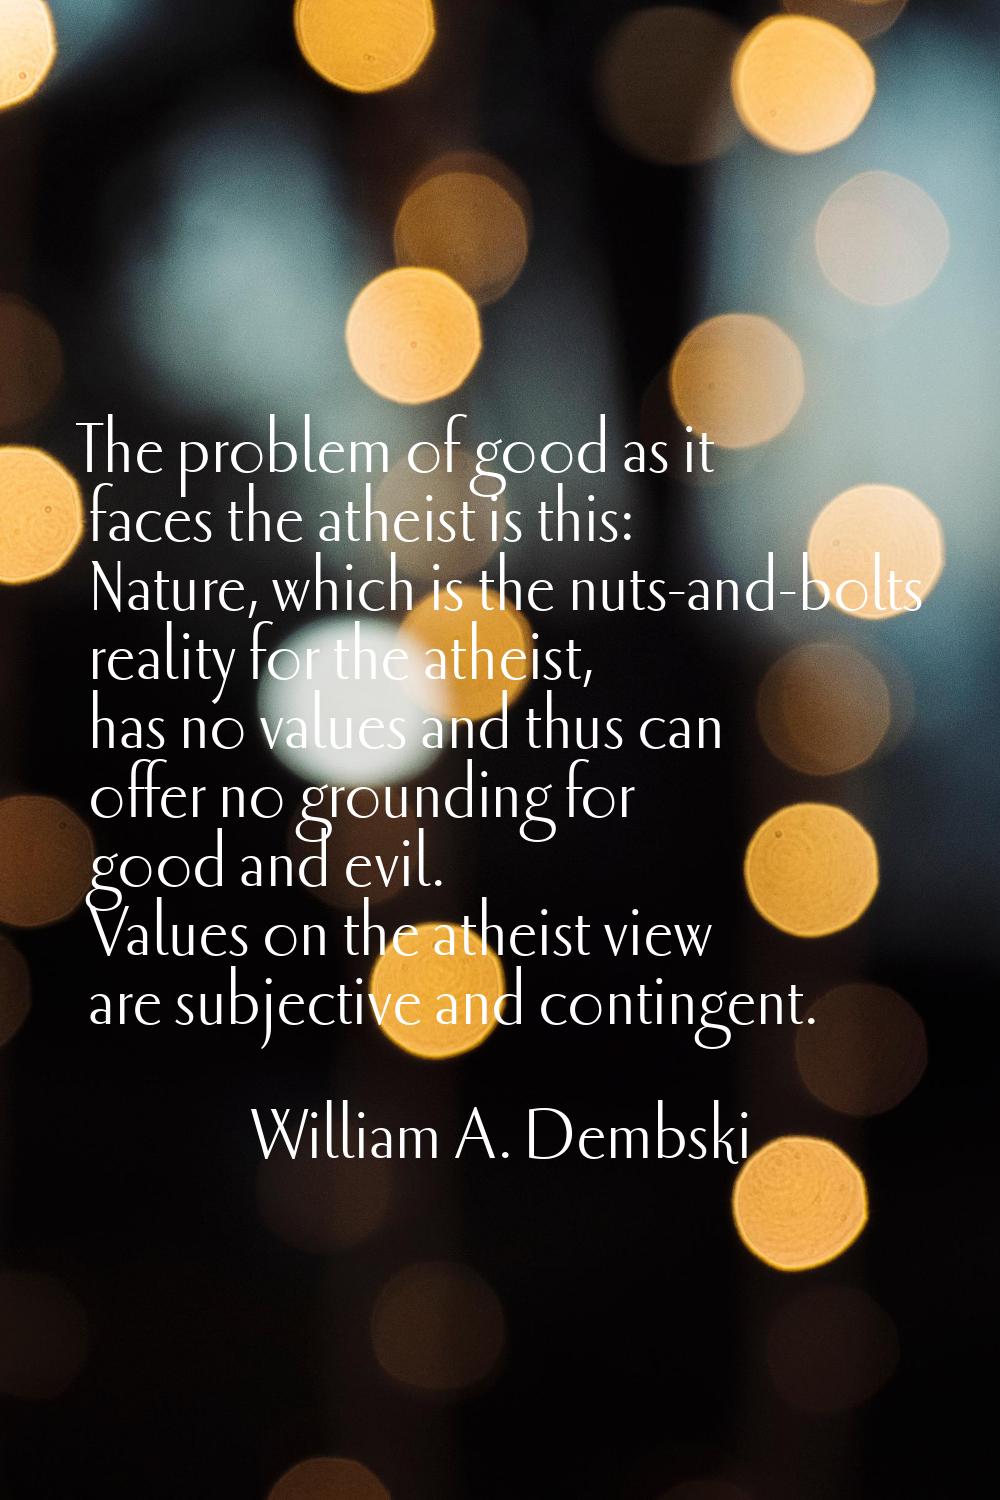 The problem of good as it faces the atheist is this: Nature, which is the nuts-and-bolts reality fo